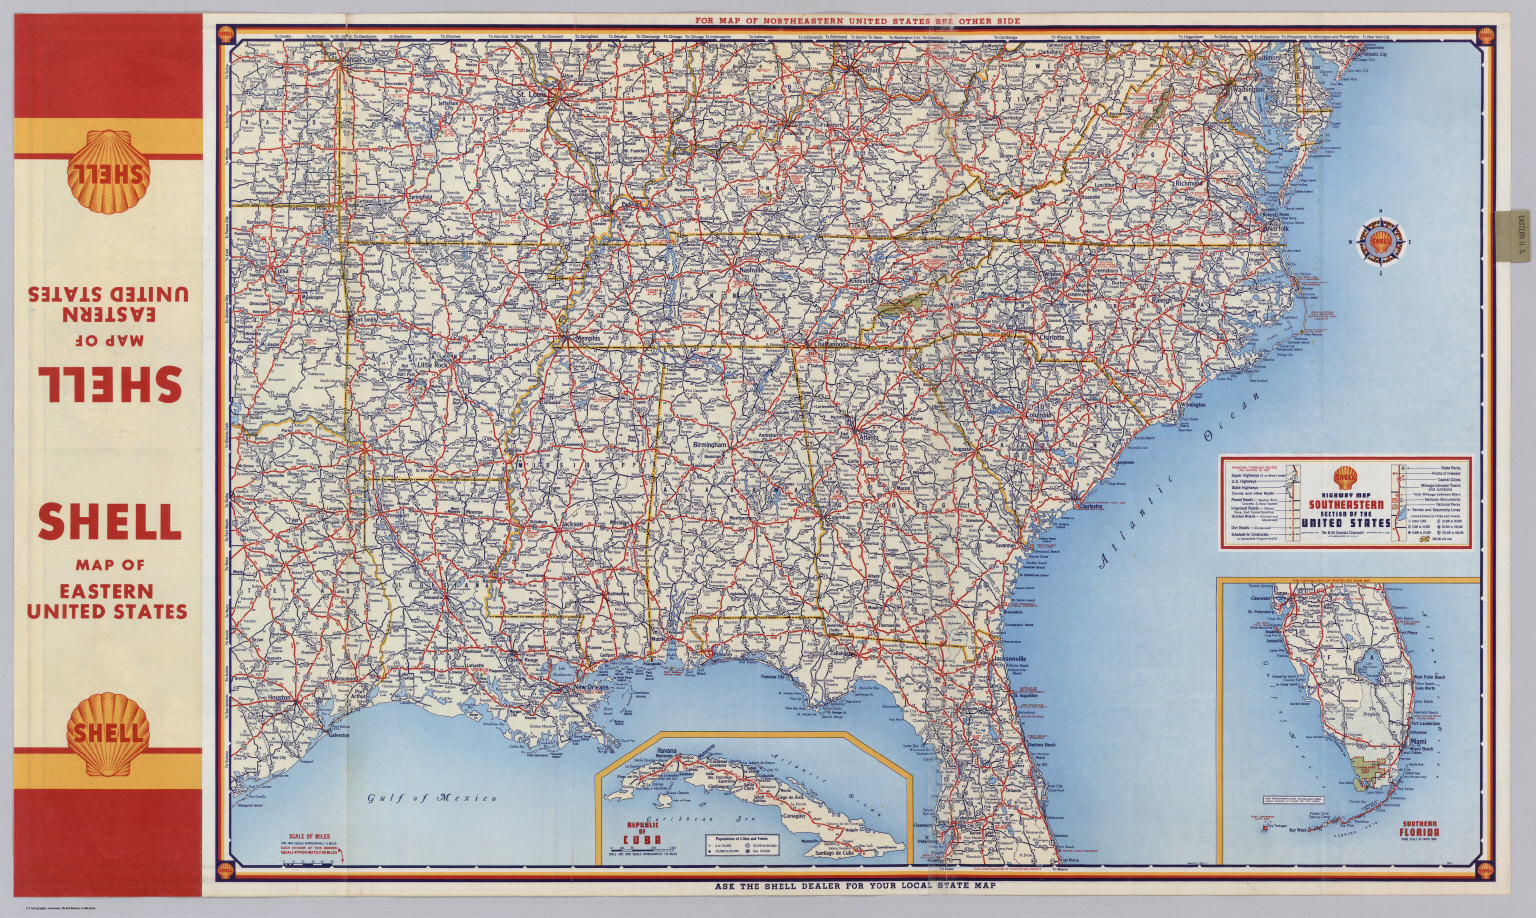 Shell Highway Map Southeastern Section of the United States. - David